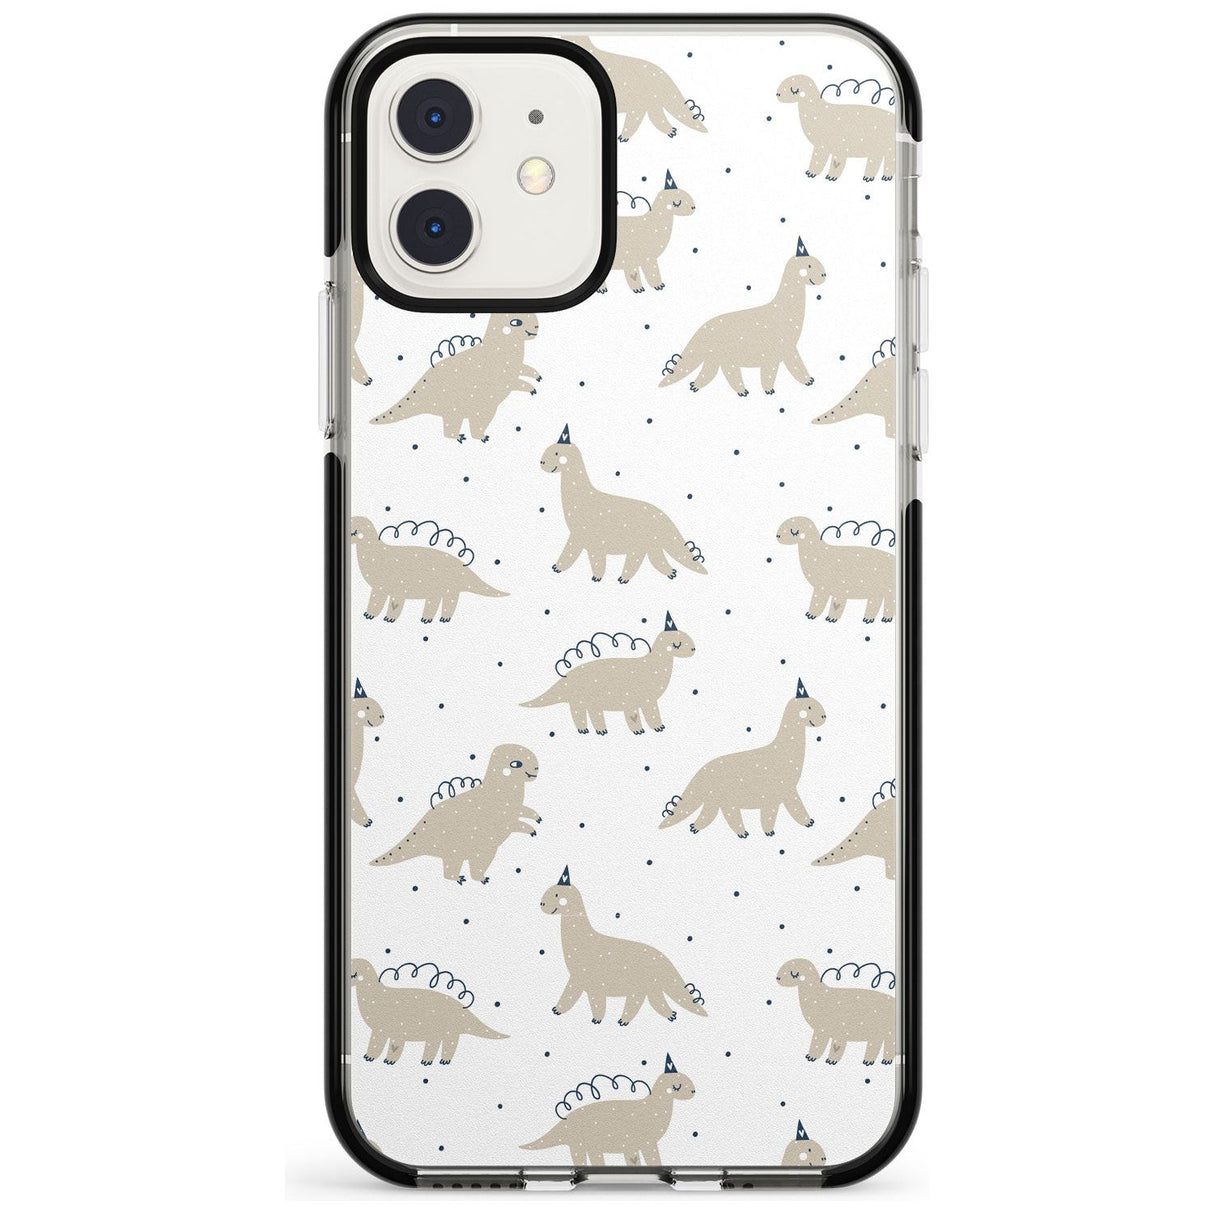 Adorable Dinosaurs Pattern Black Impact Phone Case for iPhone 11